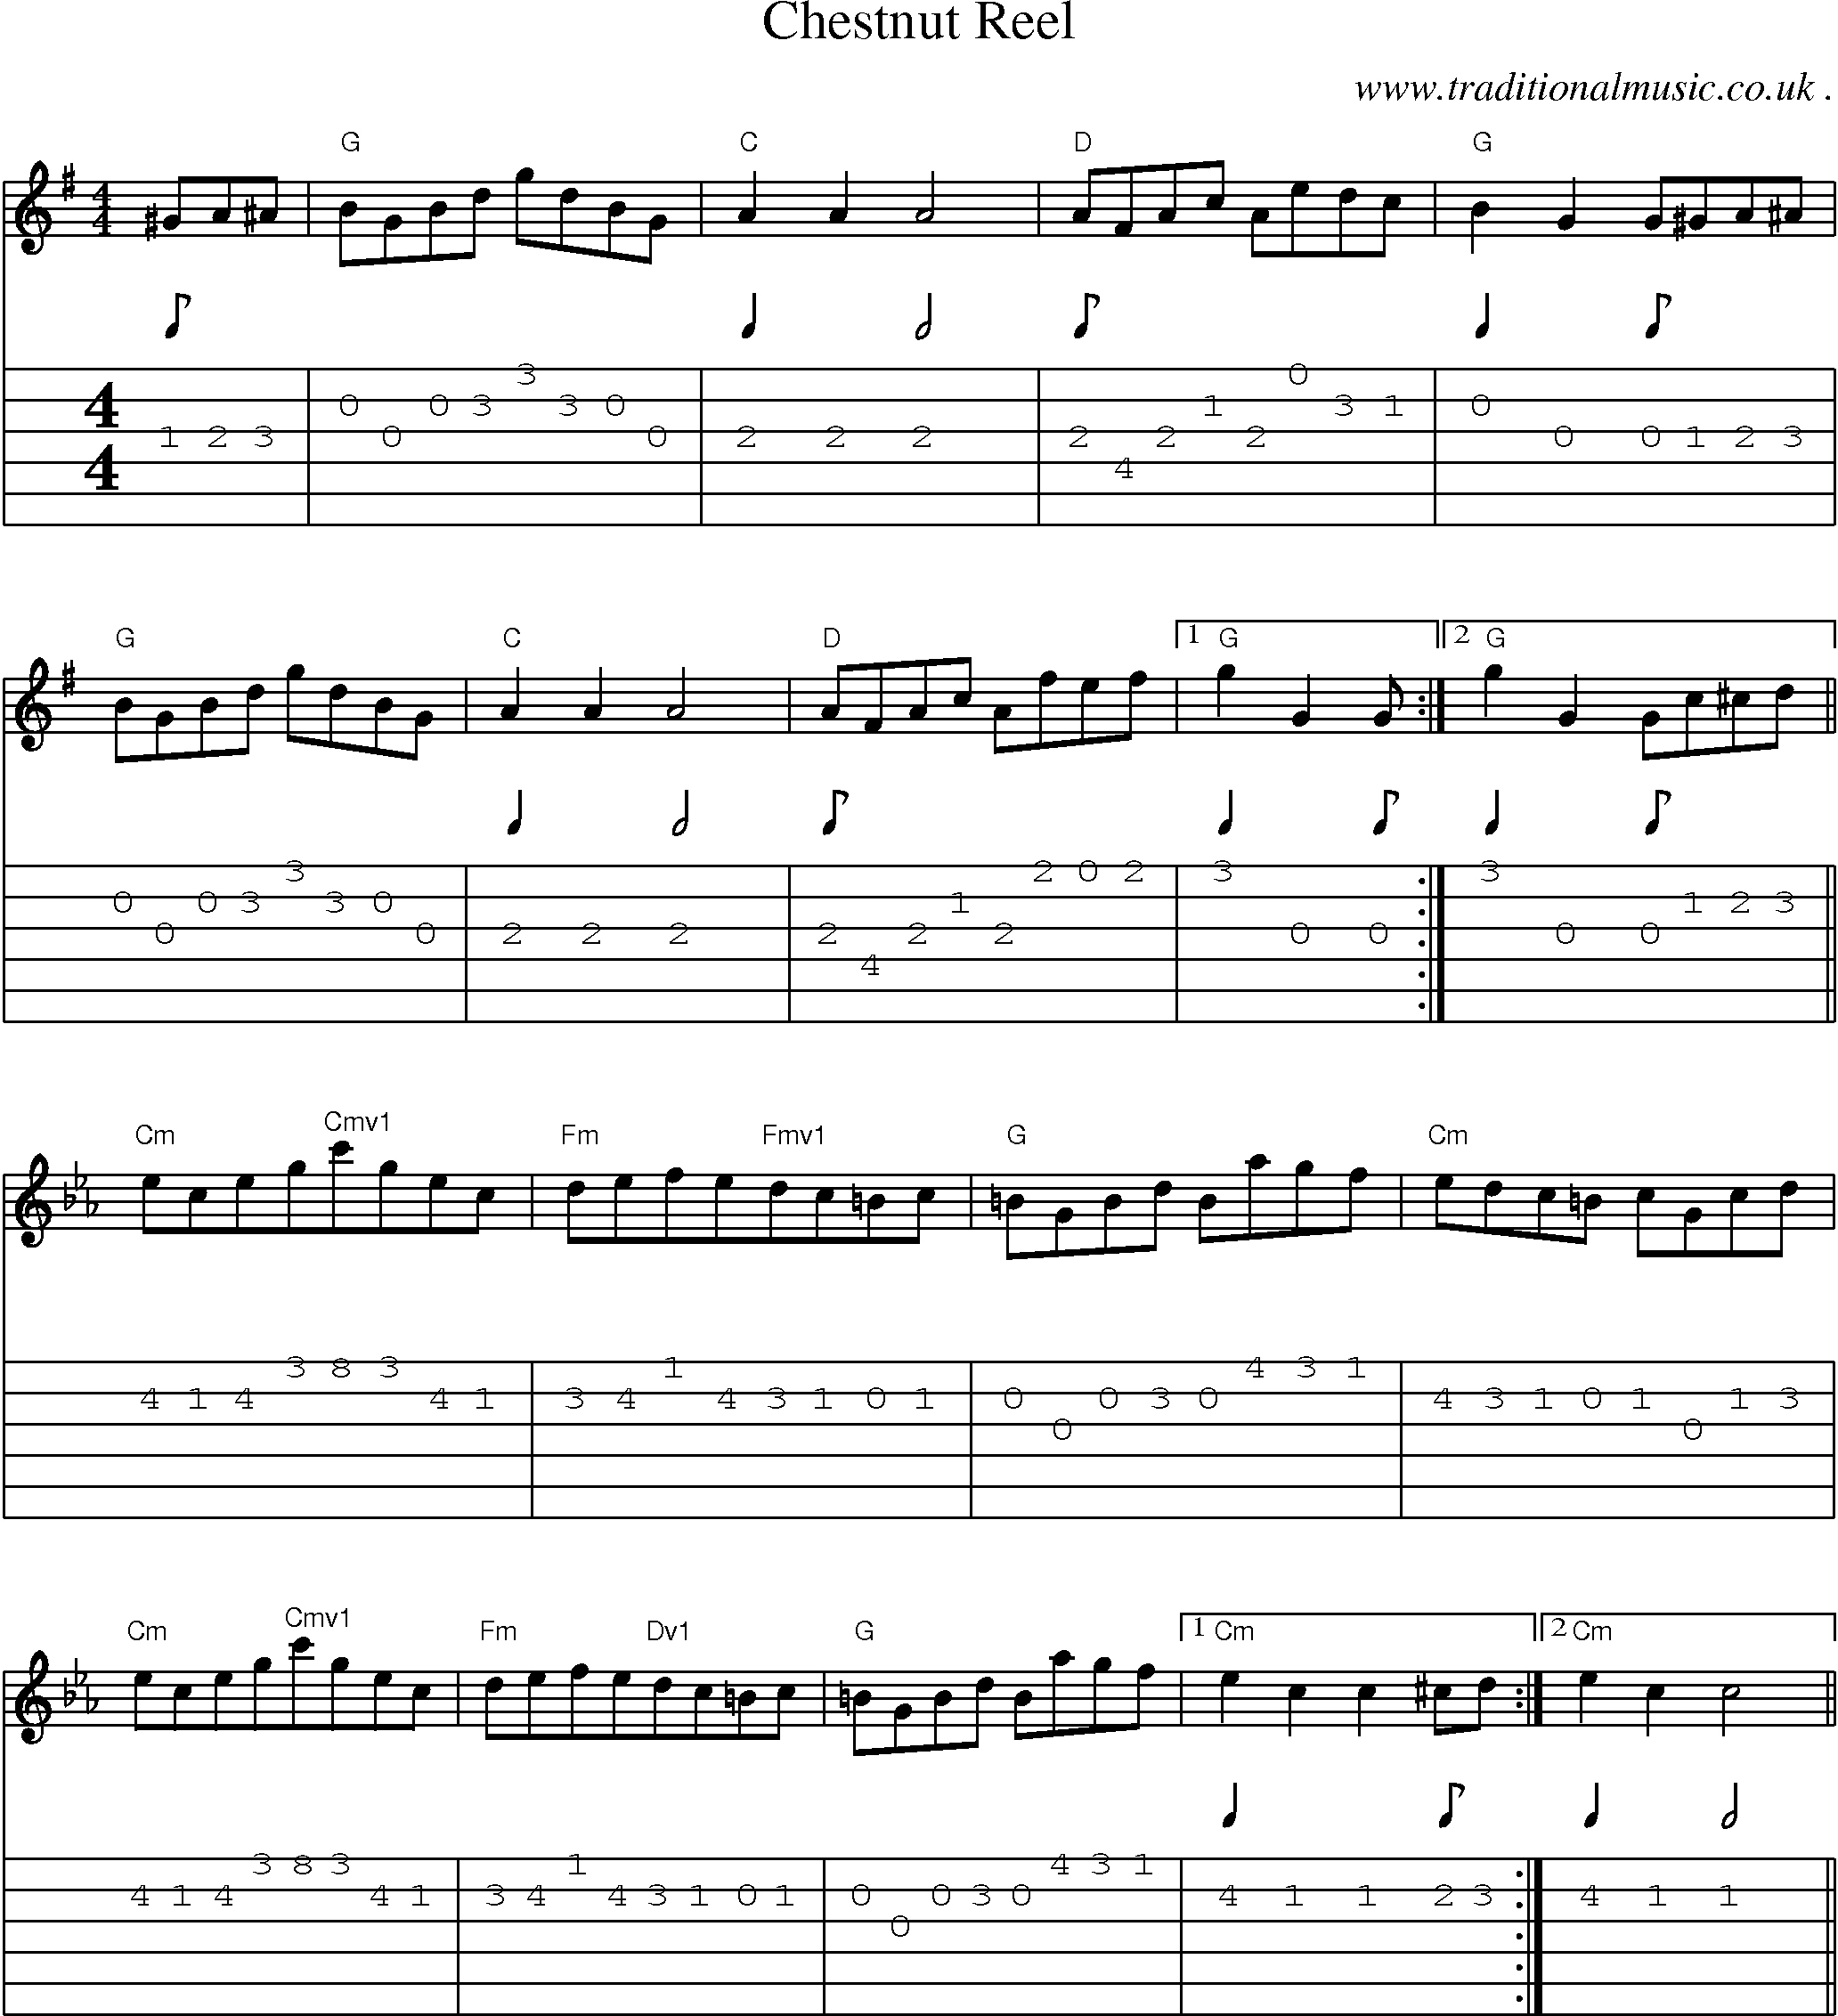 Sheet-Music and Guitar Tabs for Chestnut Reel